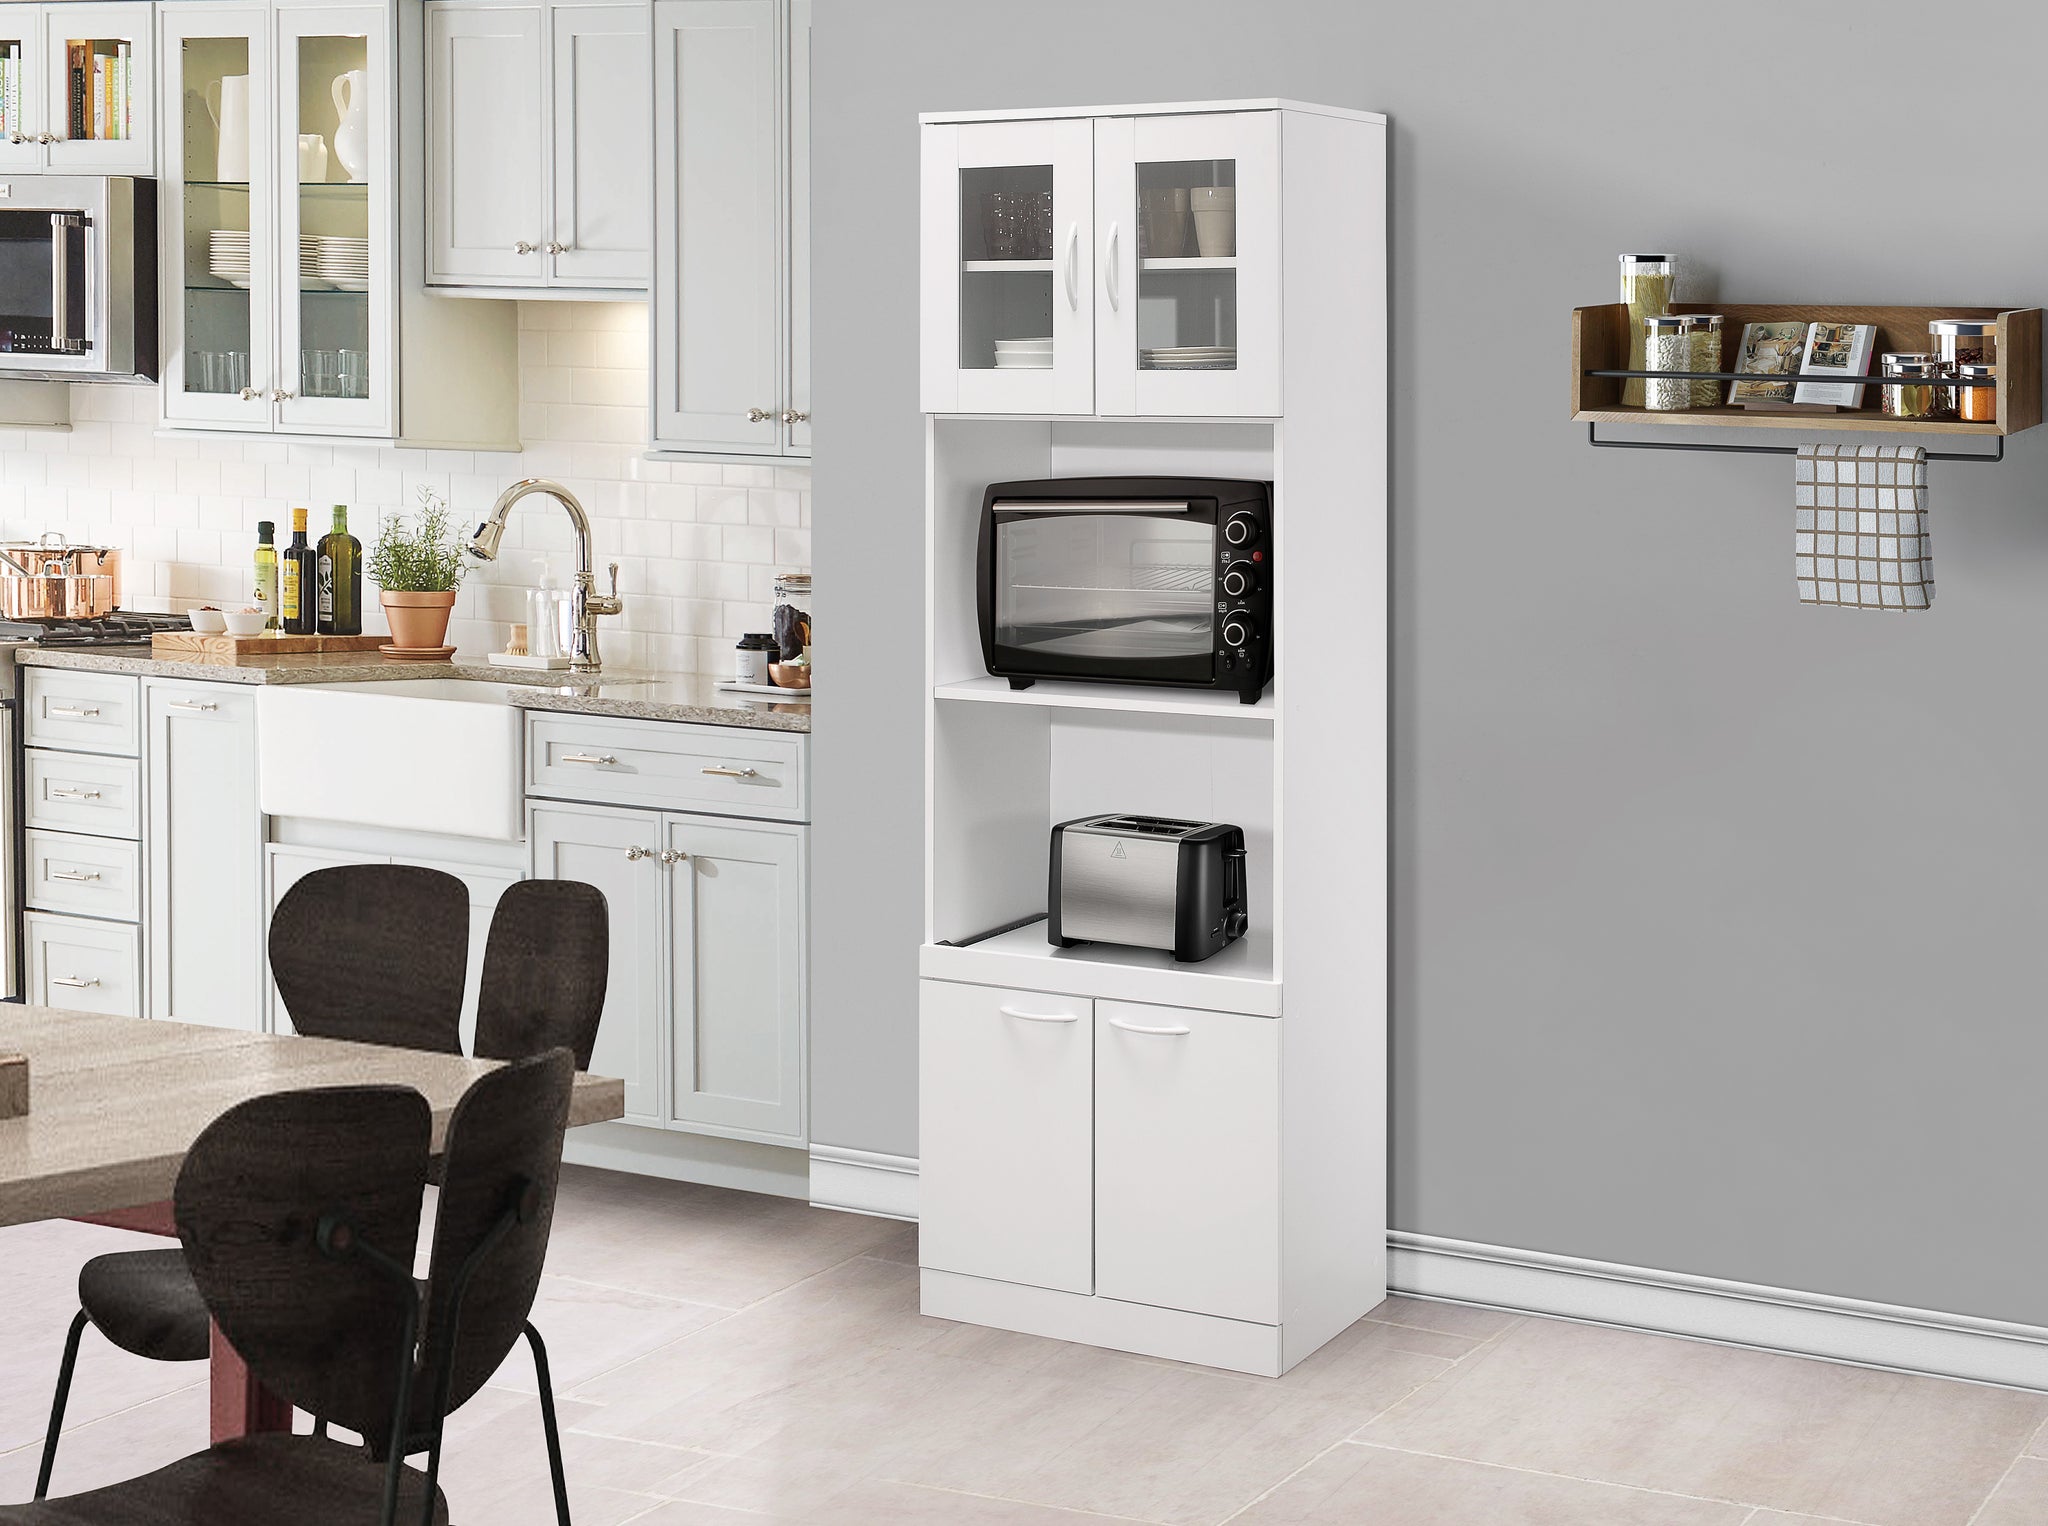 Gremlin Kitchen Storage Microwave Cabinet With Adjule Shelves White Wood Glass Contemporary Pilaster Designs